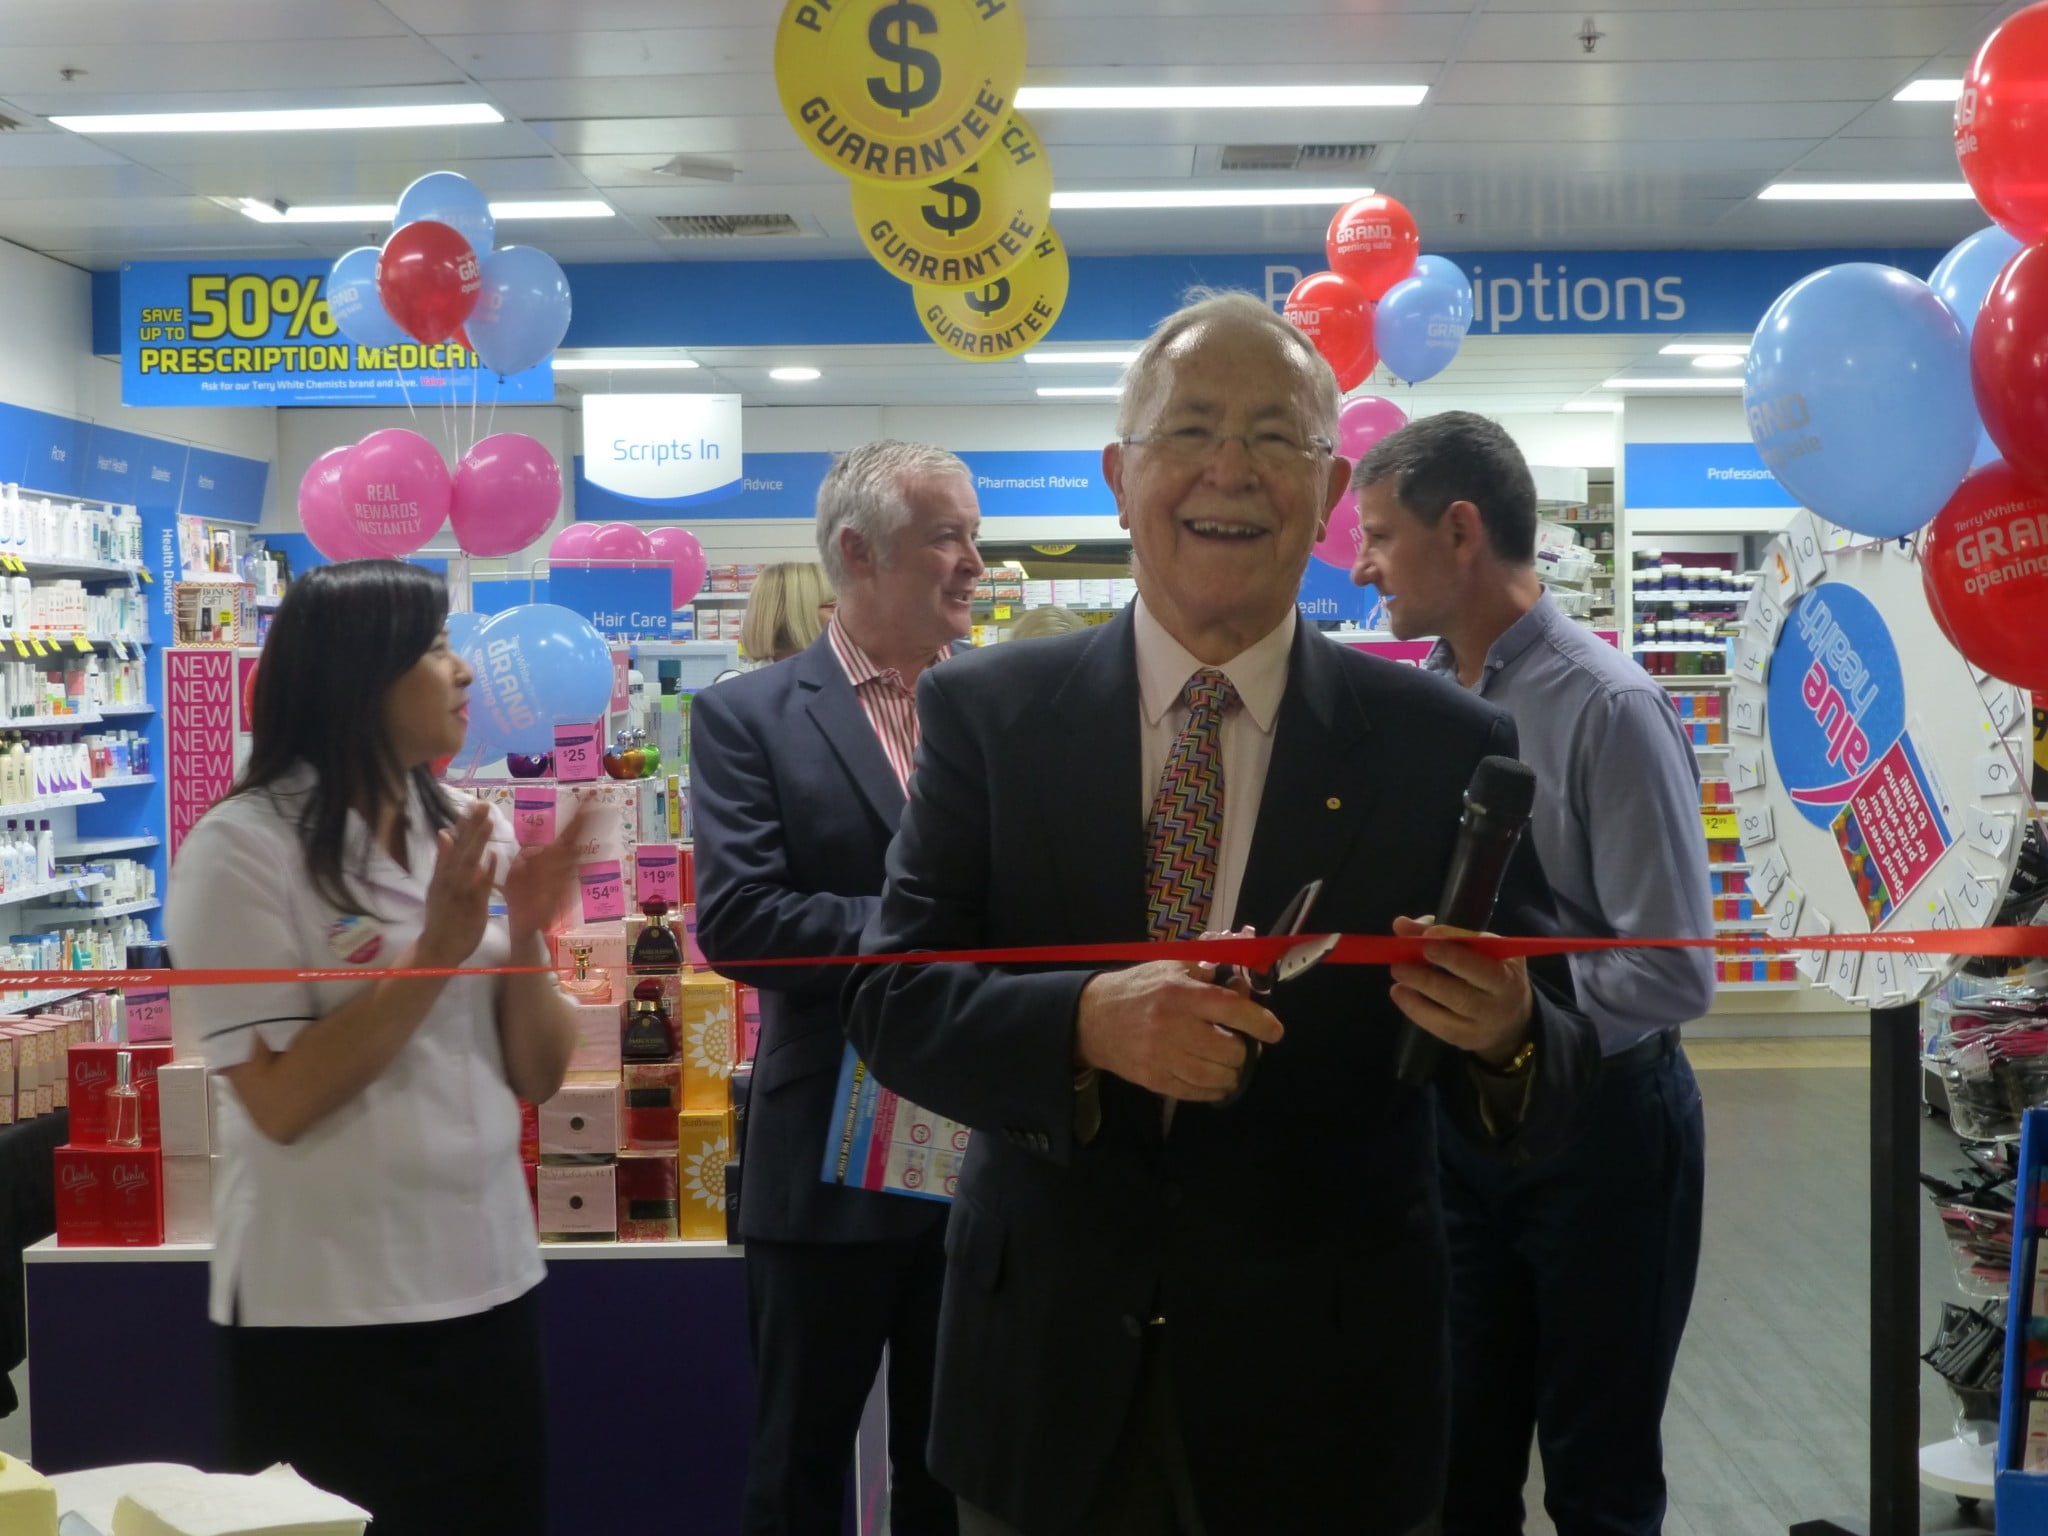 Terry White cuts the ribbon at Terry White Chemists Hilton